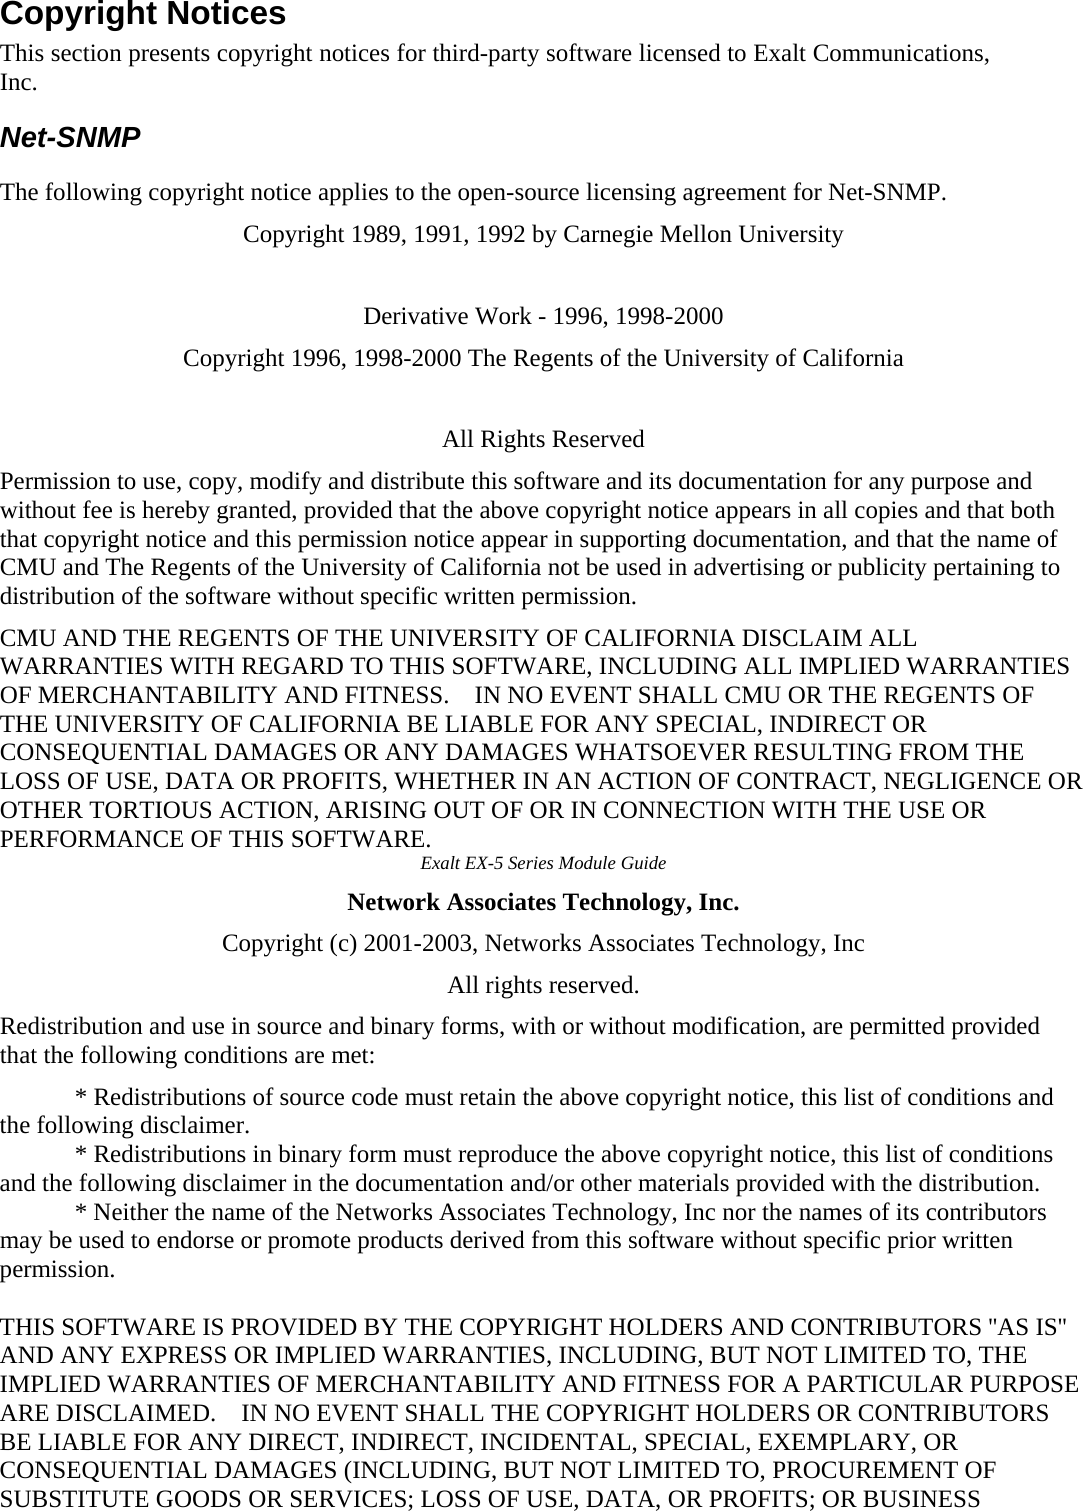 Copyright Notices   This section presents copyright notices for third-party software licensed to Exalt Communications, Inc.  Net-SNMP   The following copyright notice applies to the open-source licensing agreement for Net-SNMP.   Copyright 1989, 1991, 1992 by Carnegie Mellon University   Derivative Work - 1996, 1998-2000   Copyright 1996, 1998-2000 The Regents of the University of California   All Rights Reserved   Permission to use, copy, modify and distribute this software and its documentation for any purpose and without fee is hereby granted, provided that the above copyright notice appears in all copies and that both that copyright notice and this permission notice appear in supporting documentation, and that the name of CMU and The Regents of the University of California not be used in advertising or publicity pertaining to distribution of the software without specific written permission.   CMU AND THE REGENTS OF THE UNIVERSITY OF CALIFORNIA DISCLAIM ALL WARRANTIES WITH REGARD TO THIS SOFTWARE, INCLUDING ALL IMPLIED WARRANTIES OF MERCHANTABILITY AND FITNESS.    IN NO EVENT SHALL CMU OR THE REGENTS OF THE UNIVERSITY OF CALIFORNIA BE LIABLE FOR ANY SPECIAL, INDIRECT OR CONSEQUENTIAL DAMAGES OR ANY DAMAGES WHATSOEVER RESULTING FROM THE LOSS OF USE, DATA OR PROFITS, WHETHER IN AN ACTION OF CONTRACT, NEGLIGENCE OR OTHER TORTIOUS ACTION, ARISING OUT OF OR IN CONNECTION WITH THE USE OR PERFORMANCE OF THIS SOFTWARE.   Exalt EX-5 Series Module Guide   Network Associates Technology, Inc.   Copyright (c) 2001-2003, Networks Associates Technology, Inc   All rights reserved.   Redistribution and use in source and binary forms, with or without modification, are permitted provided that the following conditions are met:   ٛ * Redistributions of source code must retain the above copyright notice, this list of conditions and the following disclaimer.   ٛ * Redistributions in binary form must reproduce the above copyright notice, this list of conditions and the following disclaimer in the documentation and/or other materials provided with the distribution.   ٛ * Neither the name of the Networks Associates Technology, Inc nor the names of its contributors may be used to endorse or promote products derived from this software without specific prior written permission.   THIS SOFTWARE IS PROVIDED BY THE COPYRIGHT HOLDERS AND CONTRIBUTORS &apos;&apos;AS IS&apos;&apos; AND ANY EXPRESS OR IMPLIED WARRANTIES, INCLUDING, BUT NOT LIMITED TO, THE IMPLIED WARRANTIES OF MERCHANTABILITY AND FITNESS FOR A PARTICULAR PURPOSE ARE DISCLAIMED.    IN NO EVENT SHALL THE COPYRIGHT HOLDERS OR CONTRIBUTORS BE LIABLE FOR ANY DIRECT, INDIRECT, INCIDENTAL, SPECIAL, EXEMPLARY, OR CONSEQUENTIAL DAMAGES (INCLUDING, BUT NOT LIMITED TO, PROCUREMENT OF SUBSTITUTE GOODS OR SERVICES; LOSS OF USE, DATA, OR PROFITS; OR BUSINESS 